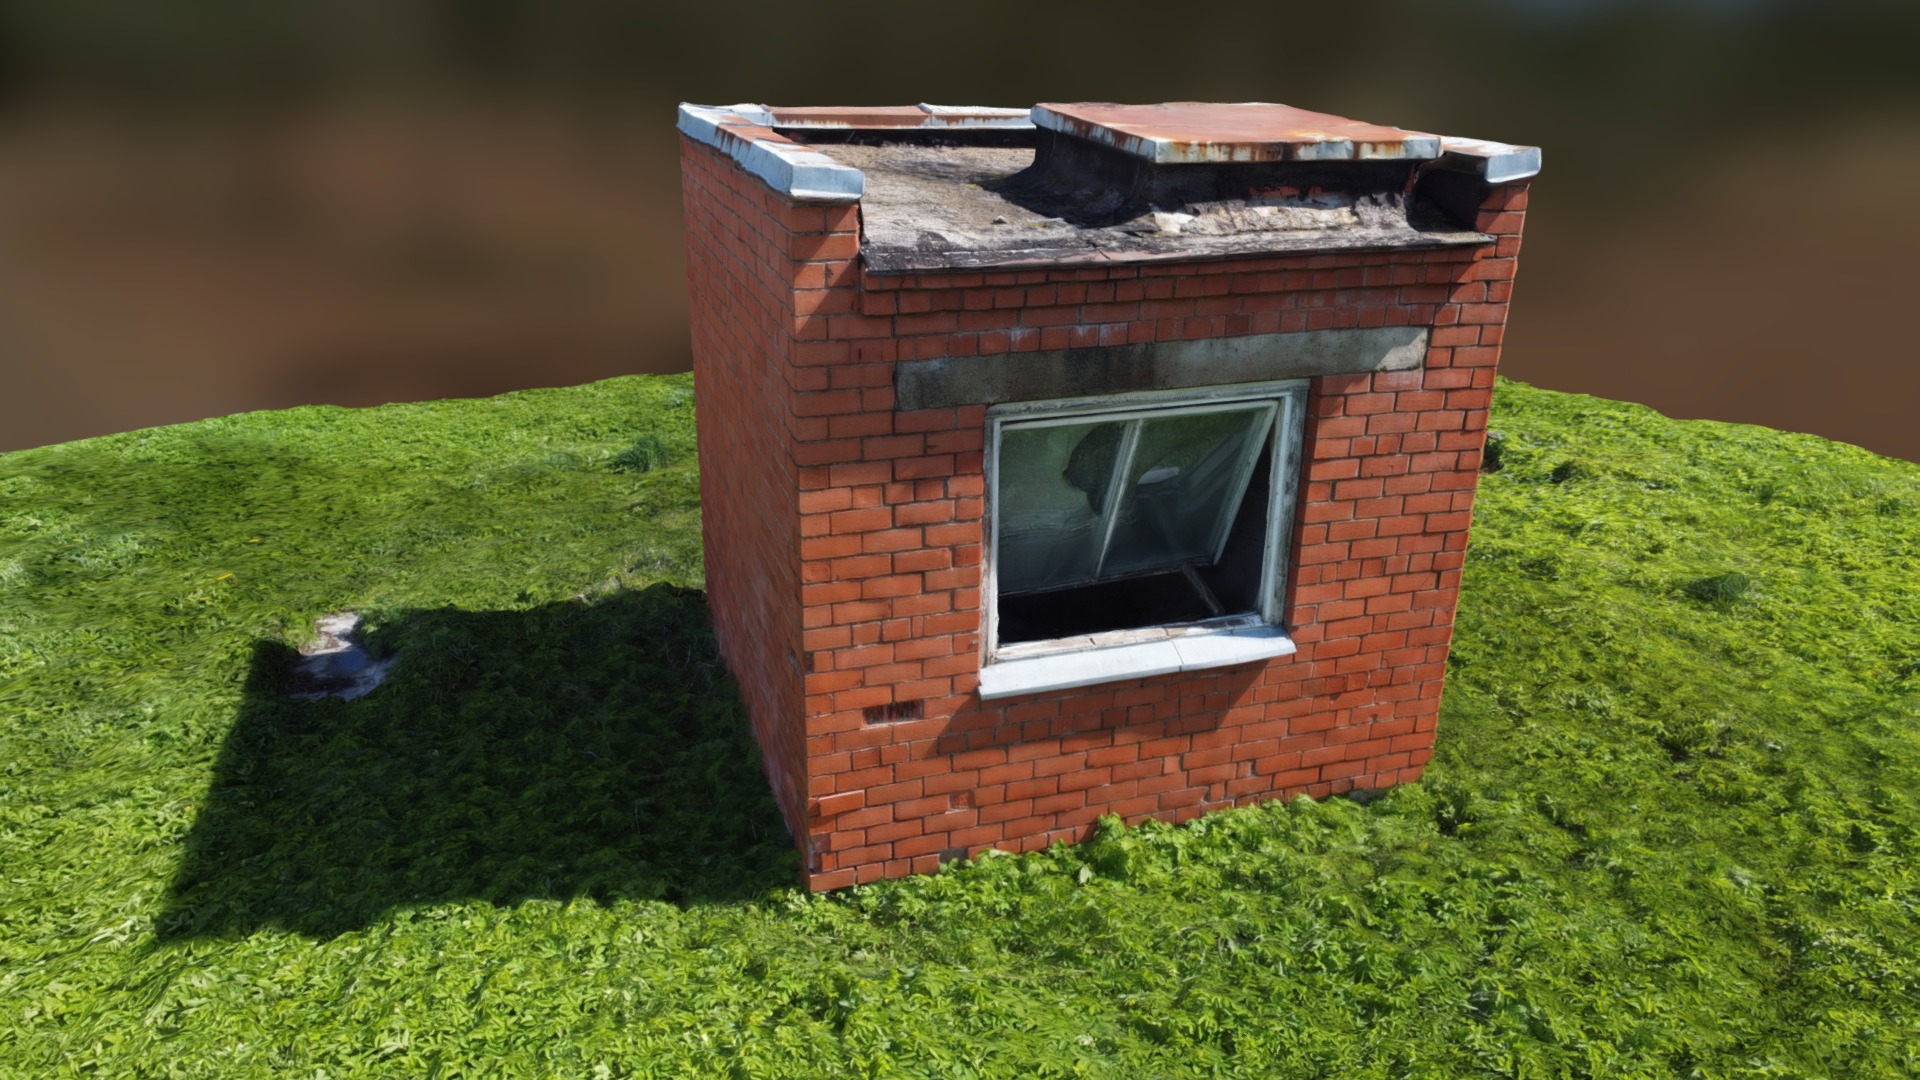 3D model Tiny Brick House - This is a 3D model of the Tiny Brick House. The 3D model is about a brick building in a grassy area.